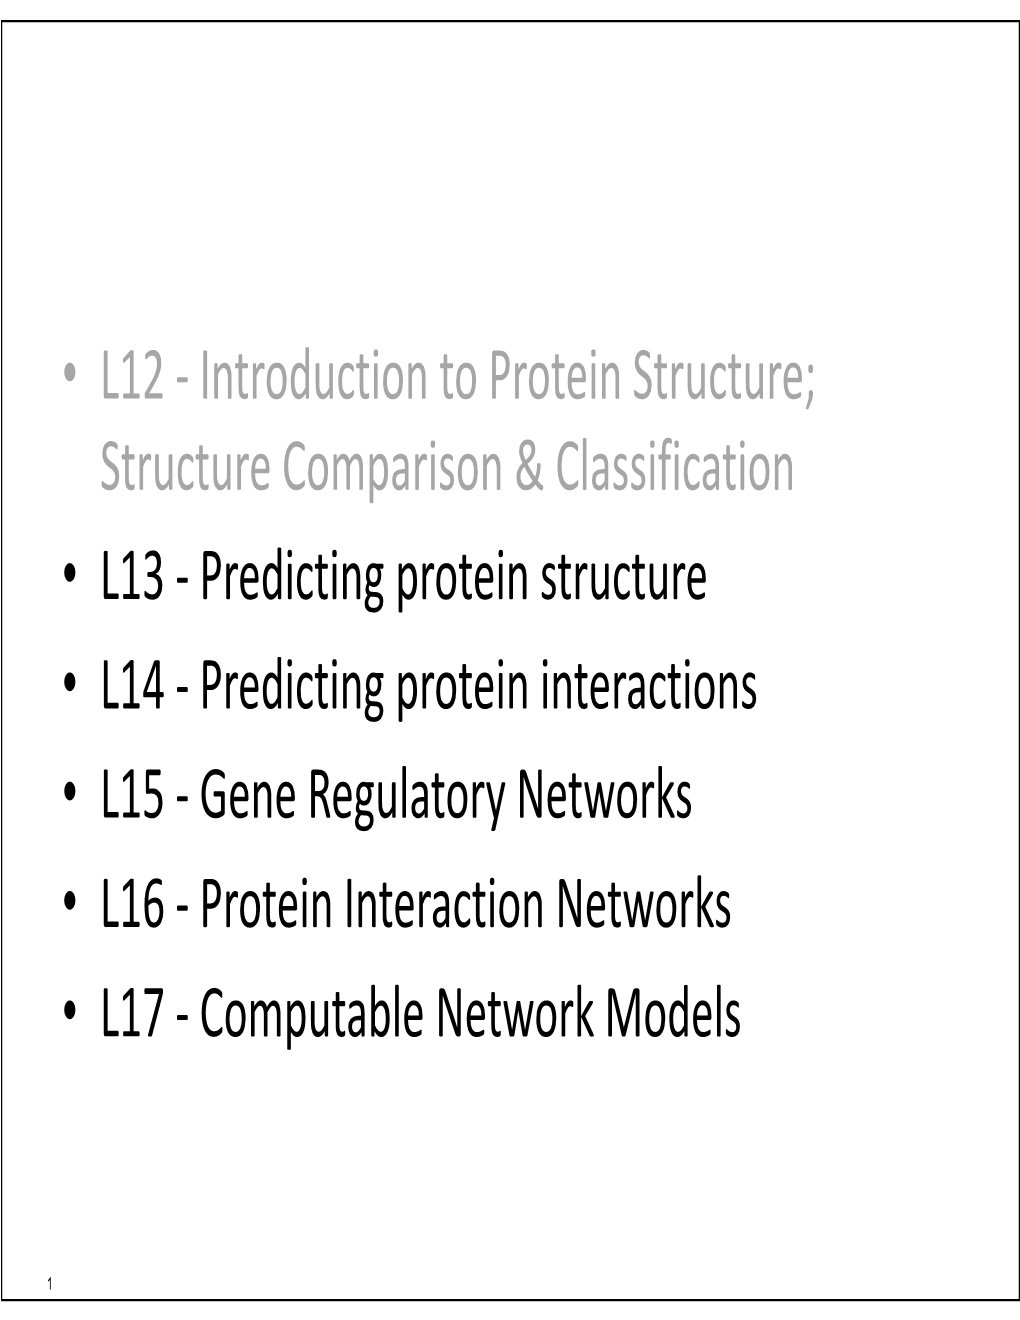 Predicting Protein Structure